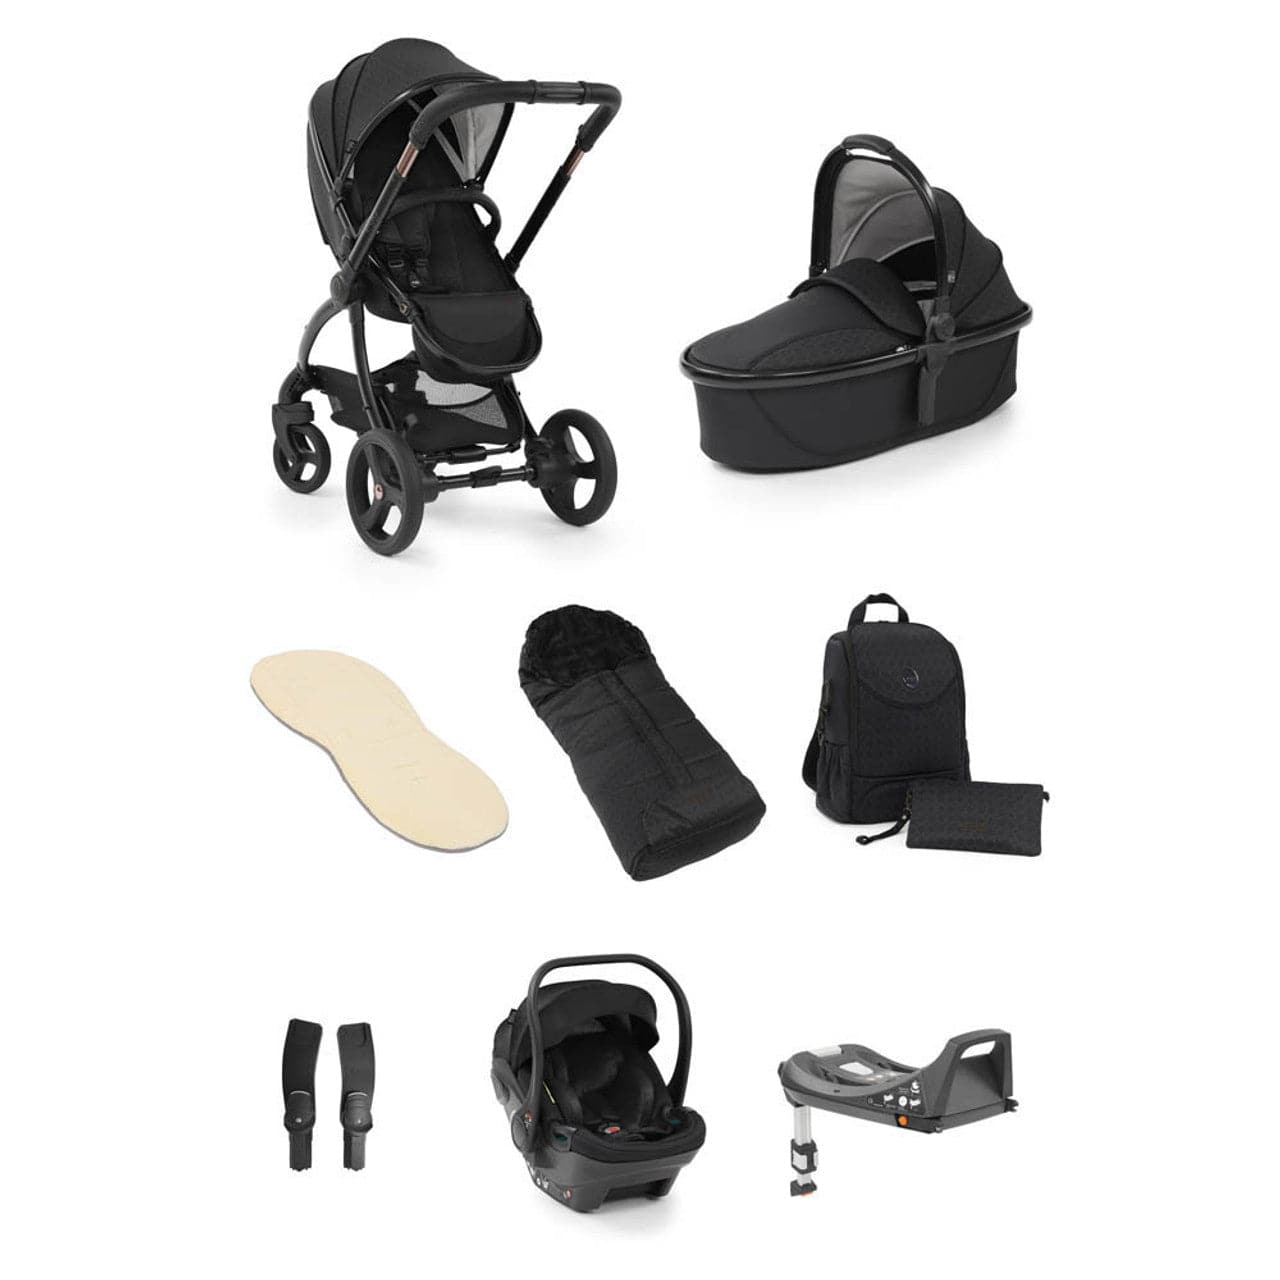 Egg® 2 Luxury Shell i-Size Special Edition Bundle - Black Geo -  | For Your Little One